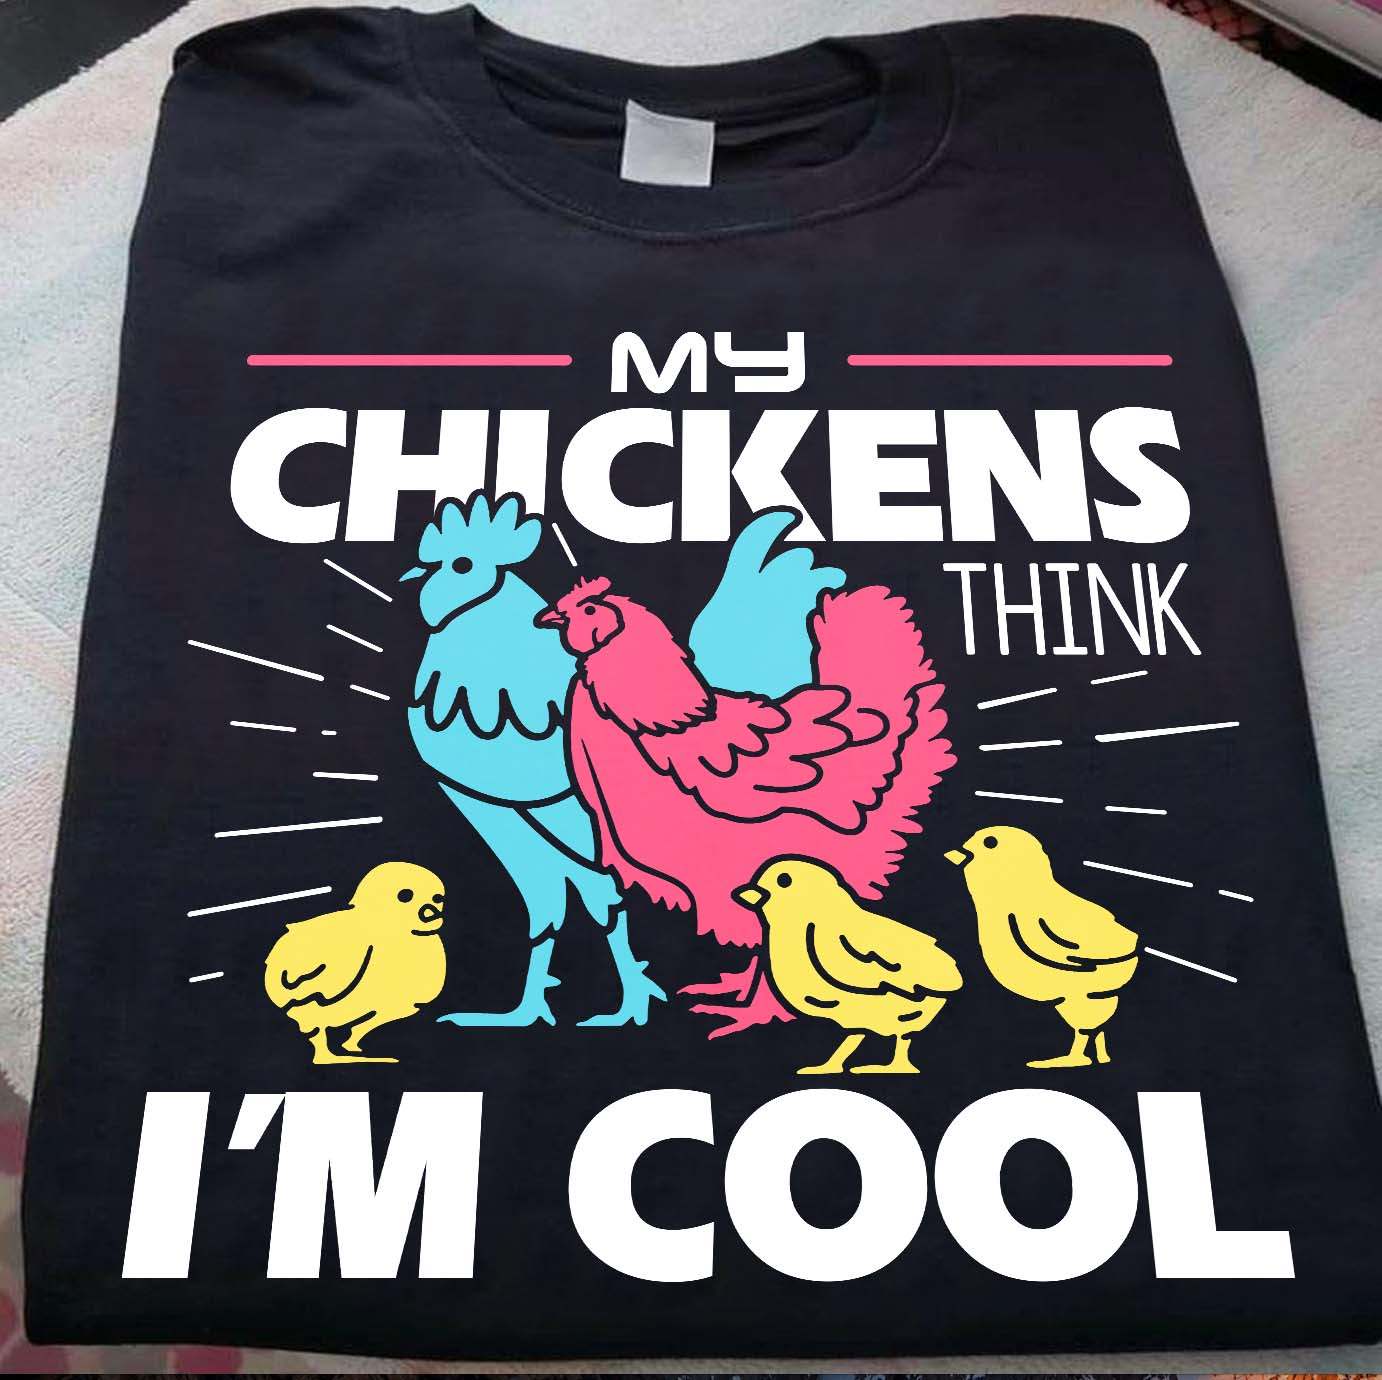 My Chickens - My chickens think I'm cool